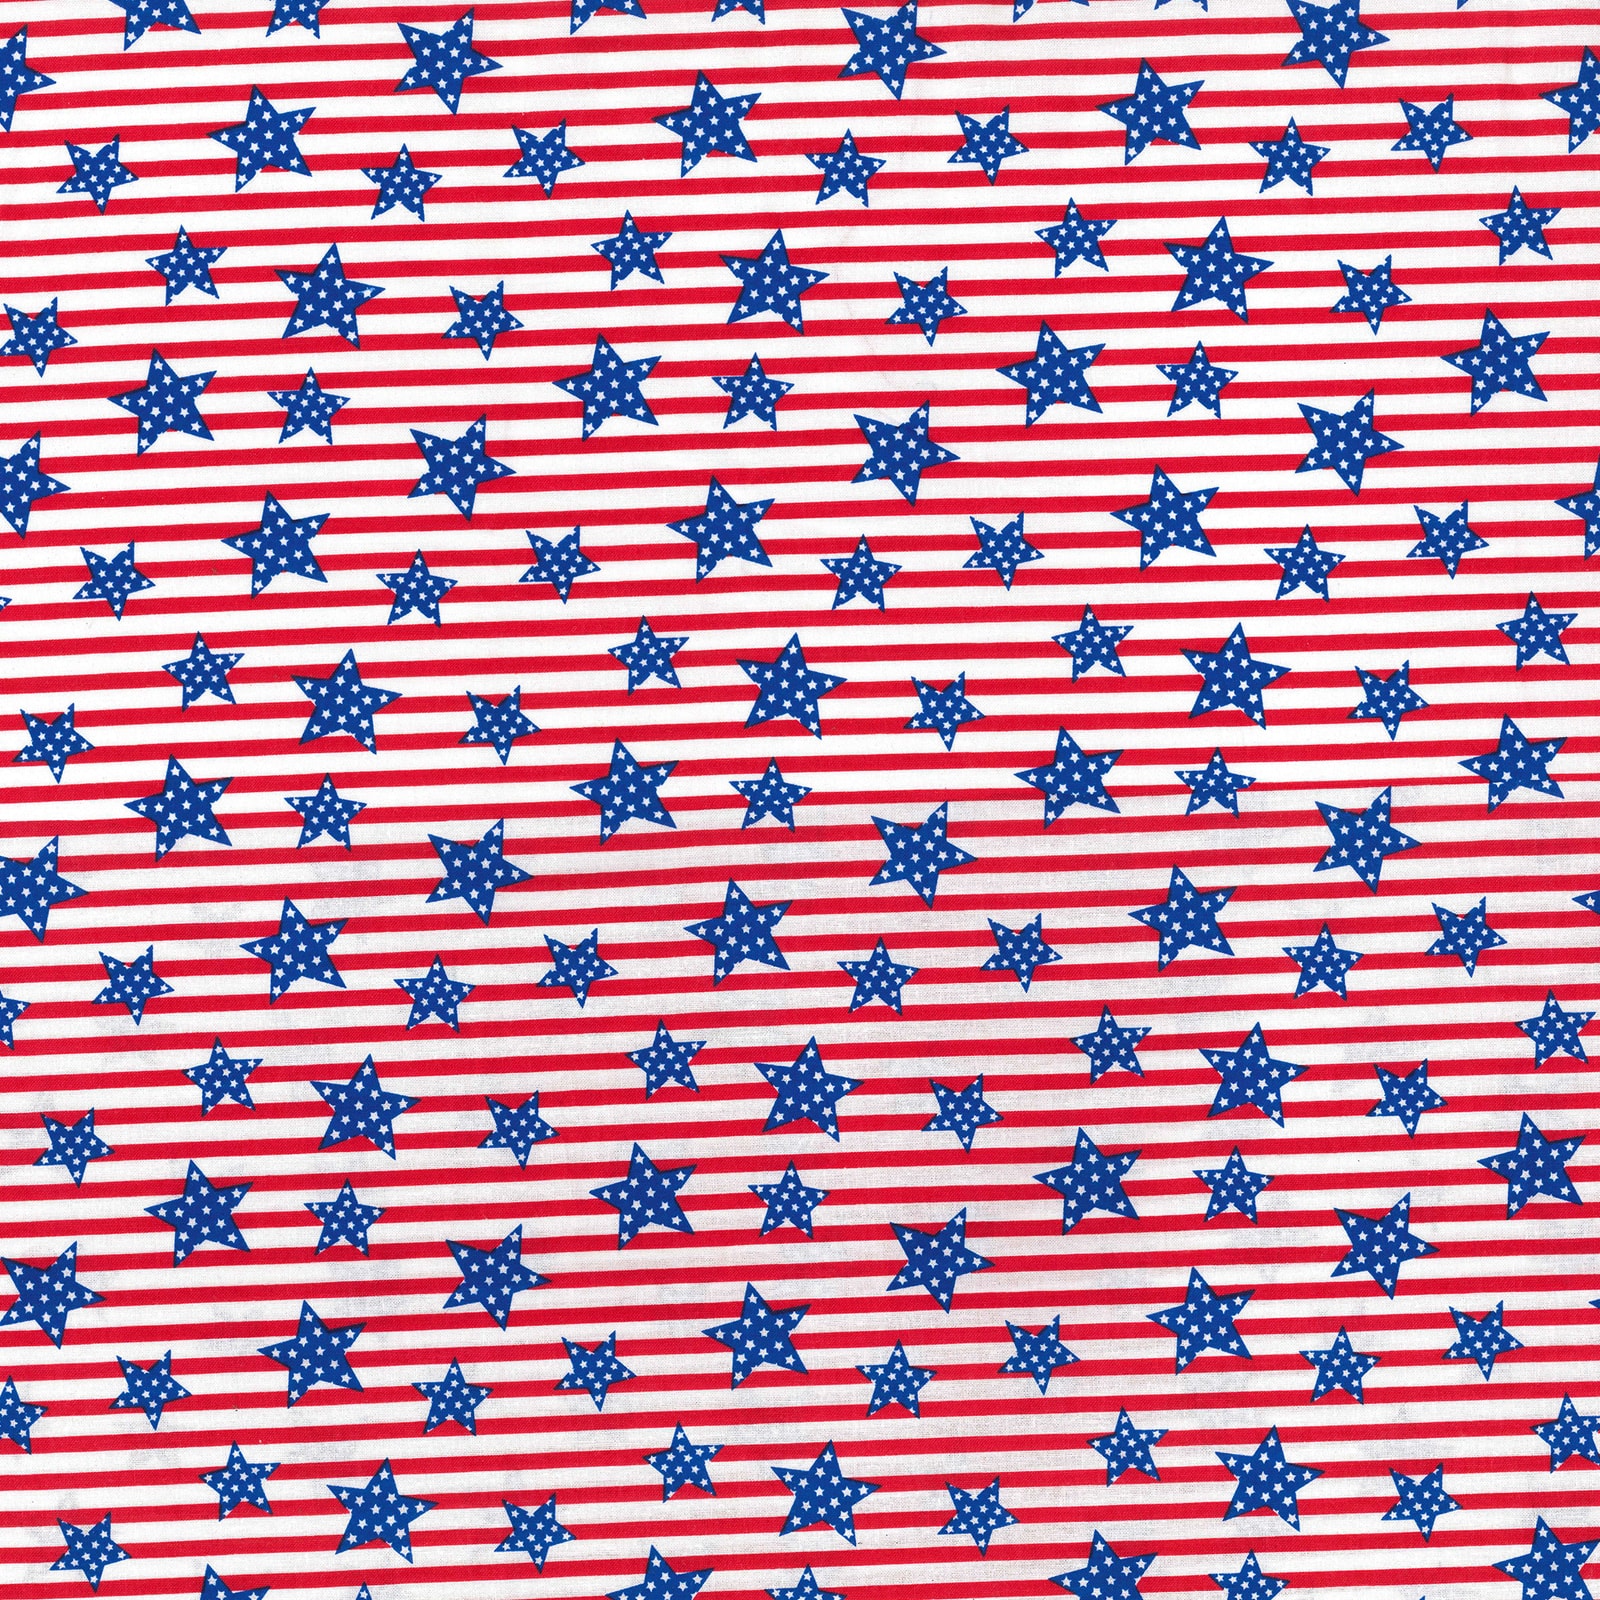 Fabric Traditions Red, White &#x26; Blue Stars on Stripes Cotton Fabric